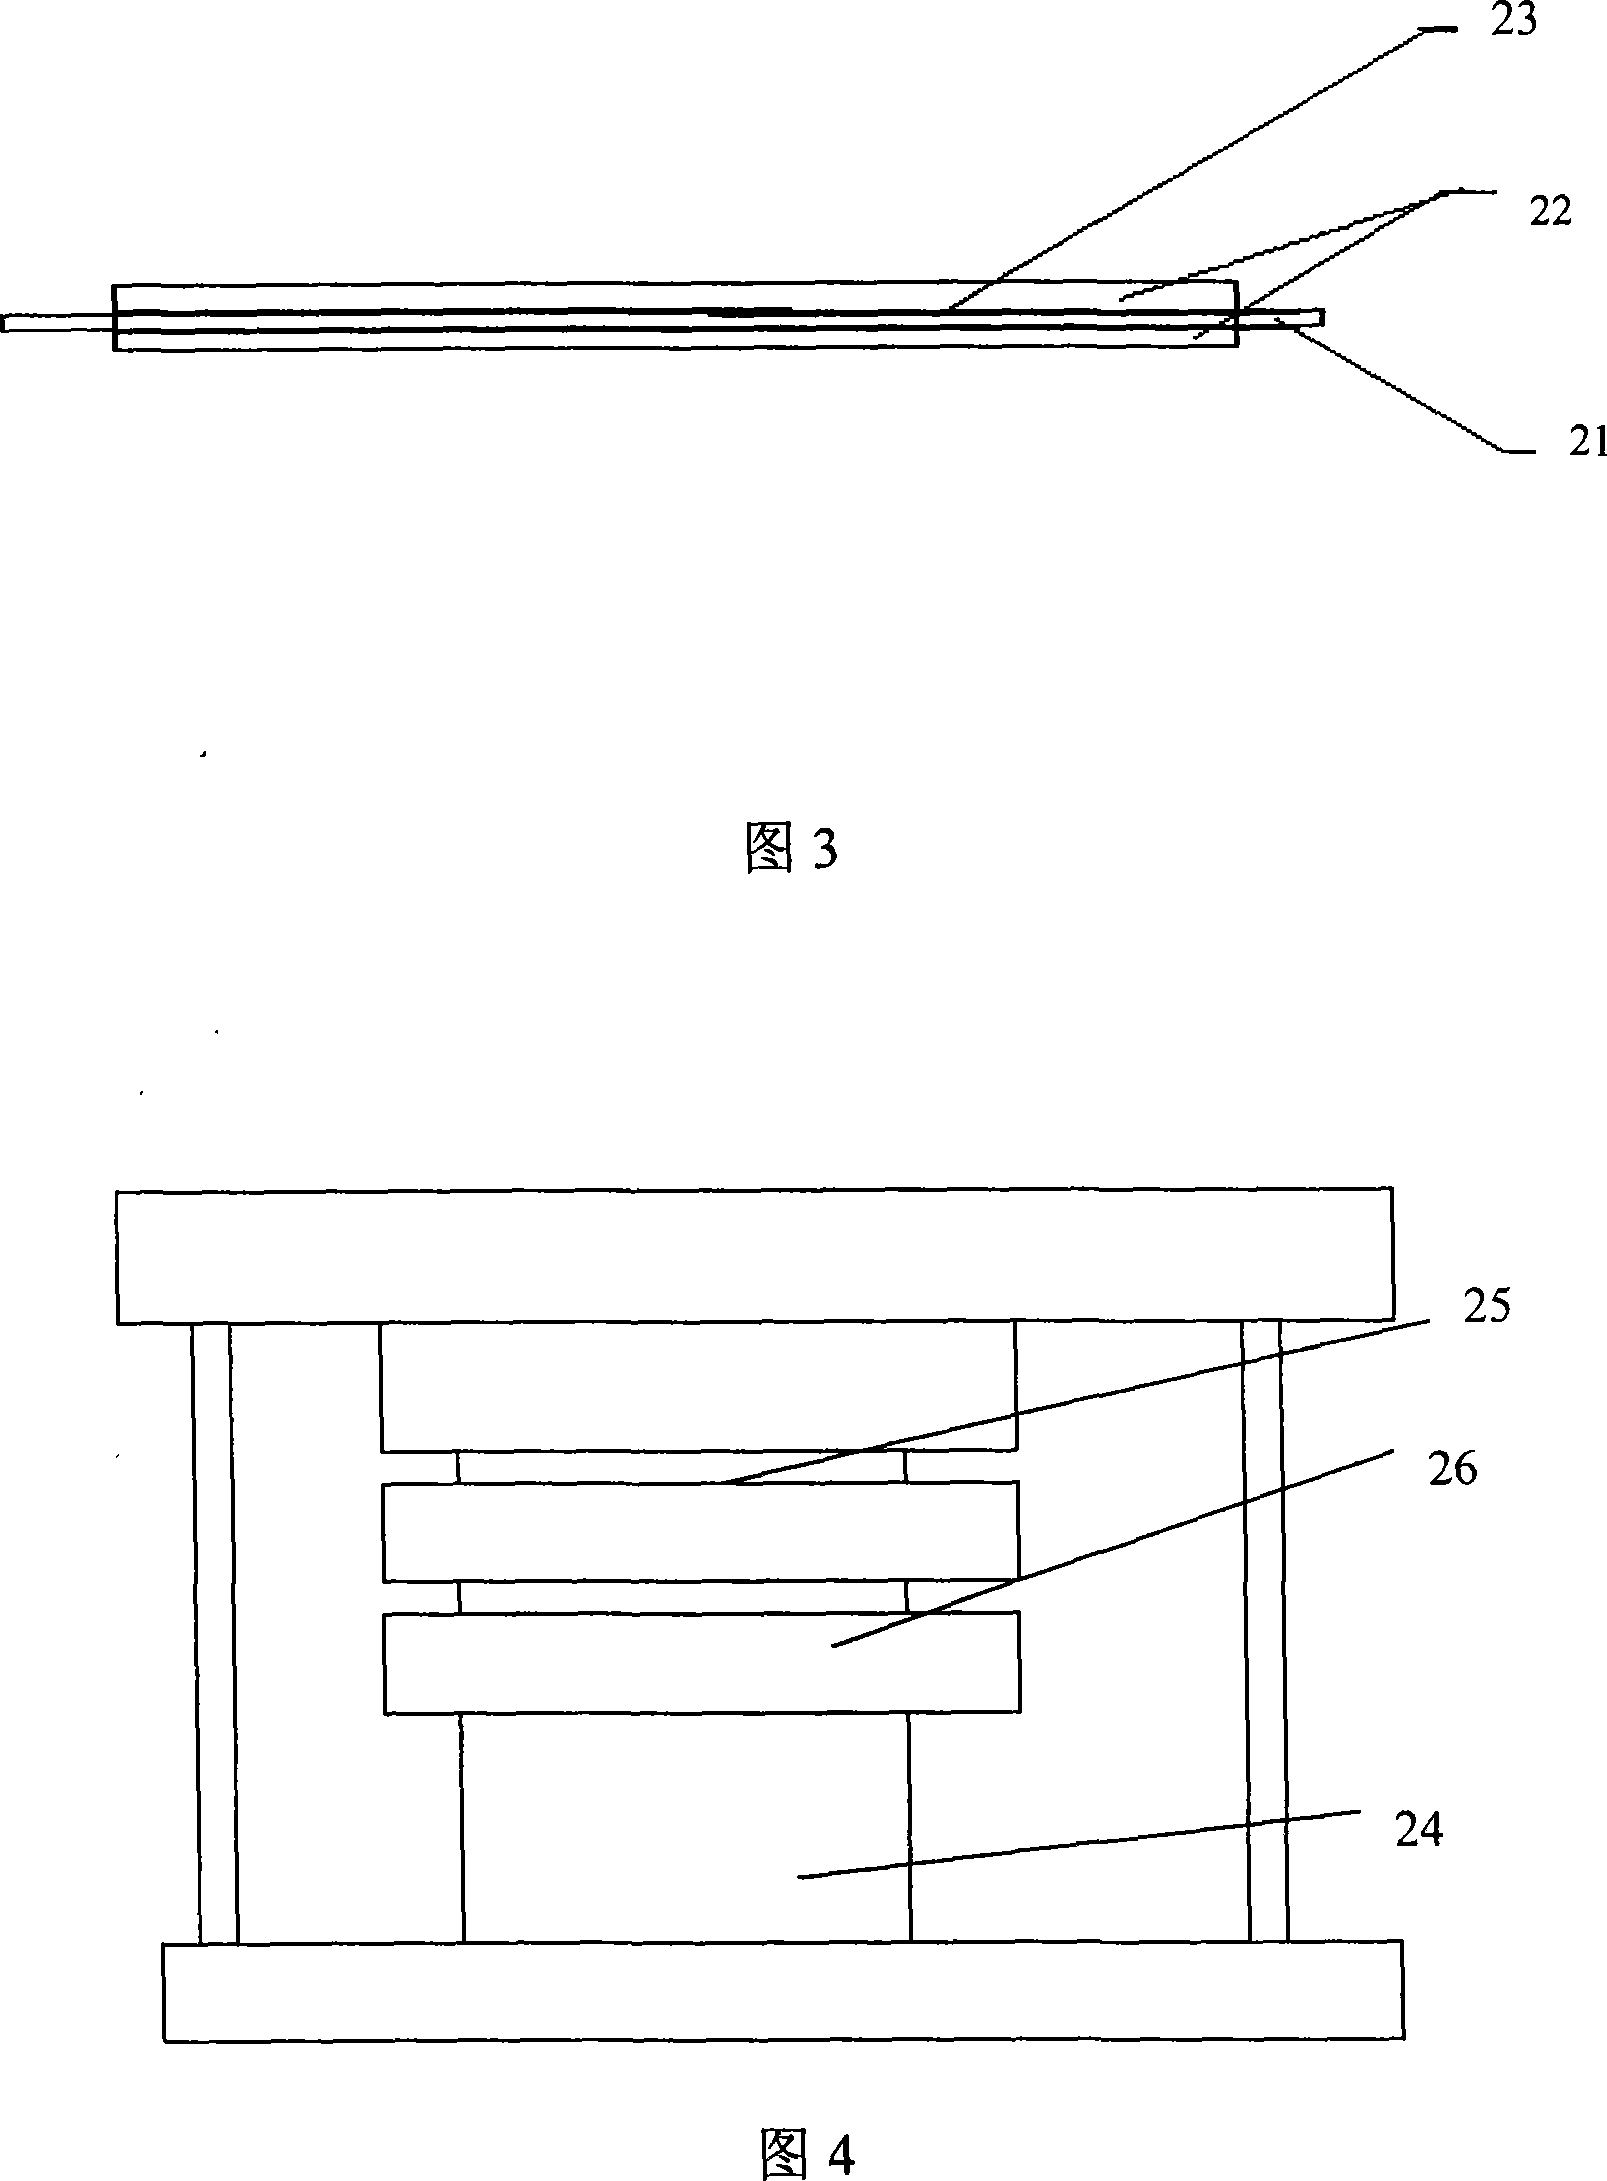 Wet-type copper based powder metallurgy friction wafer and manufacturing method